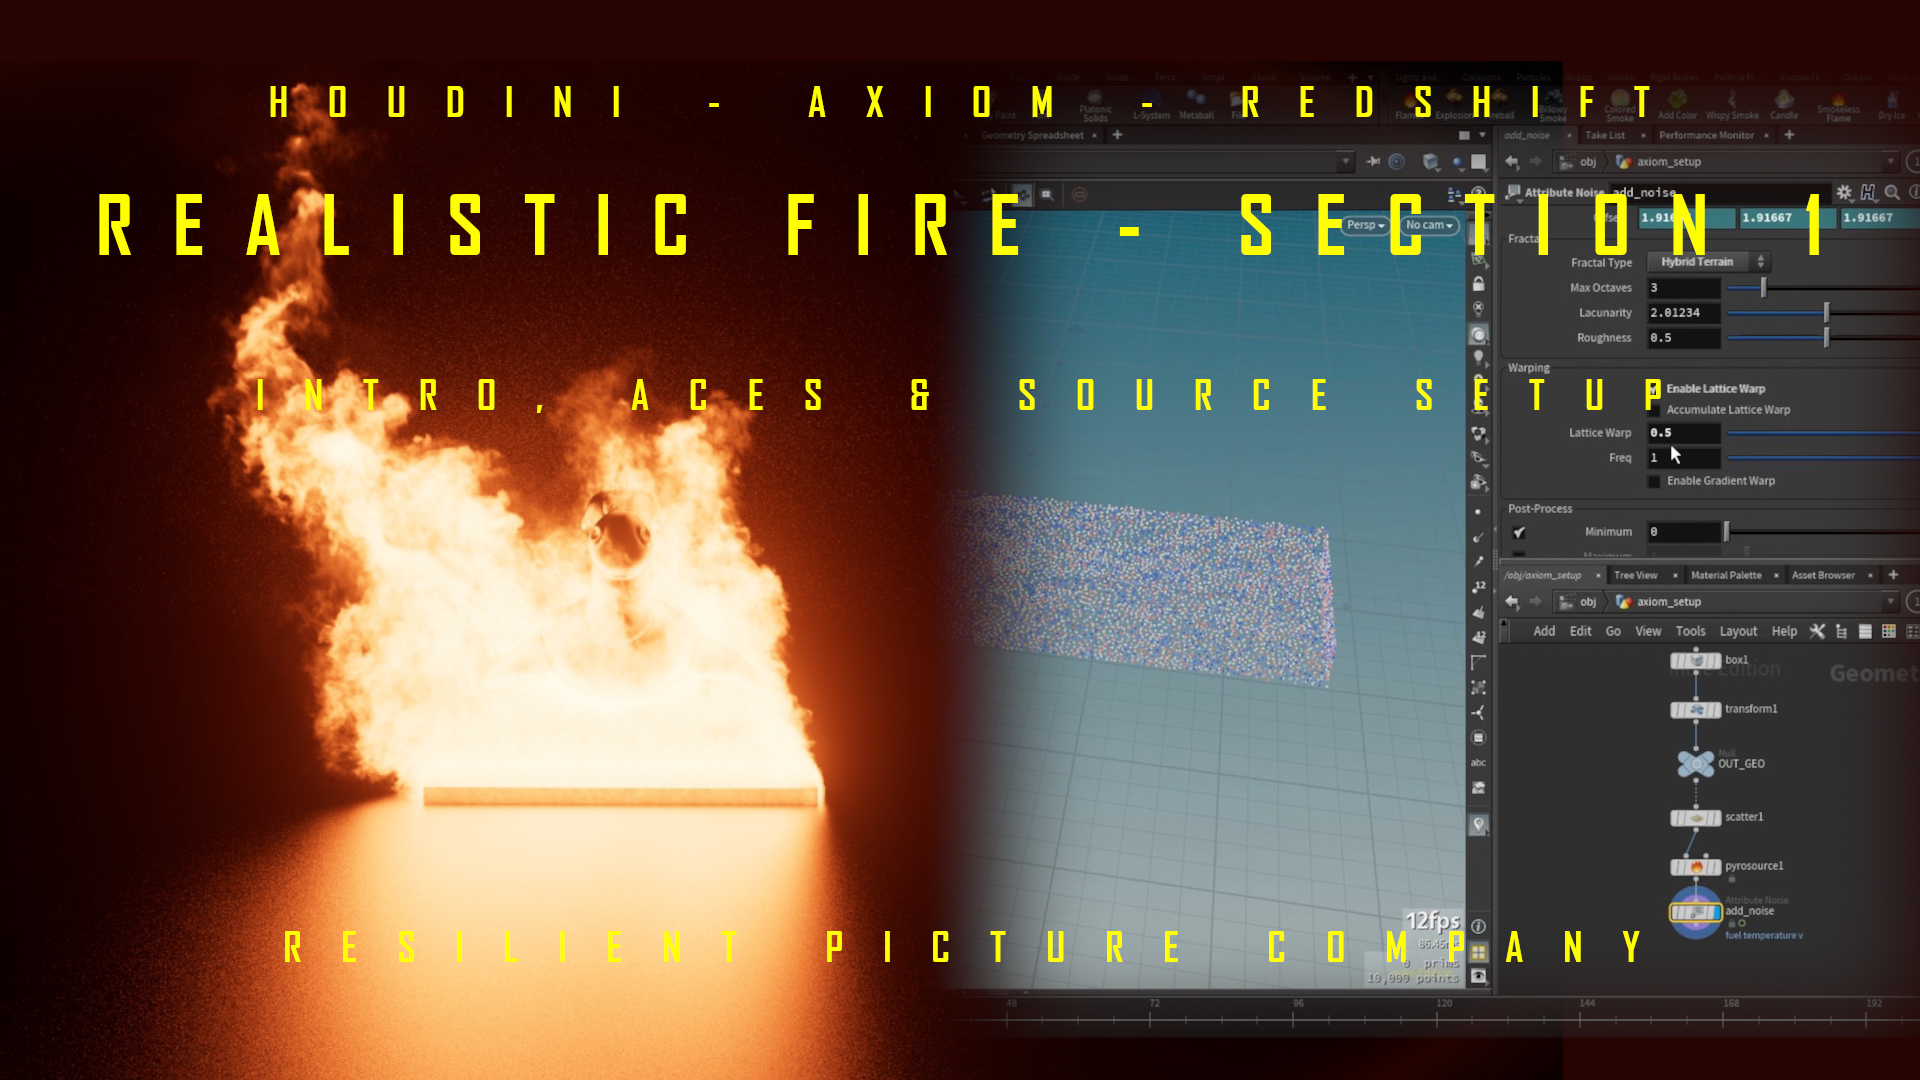 REALISTIC FIRE - SECTION 1